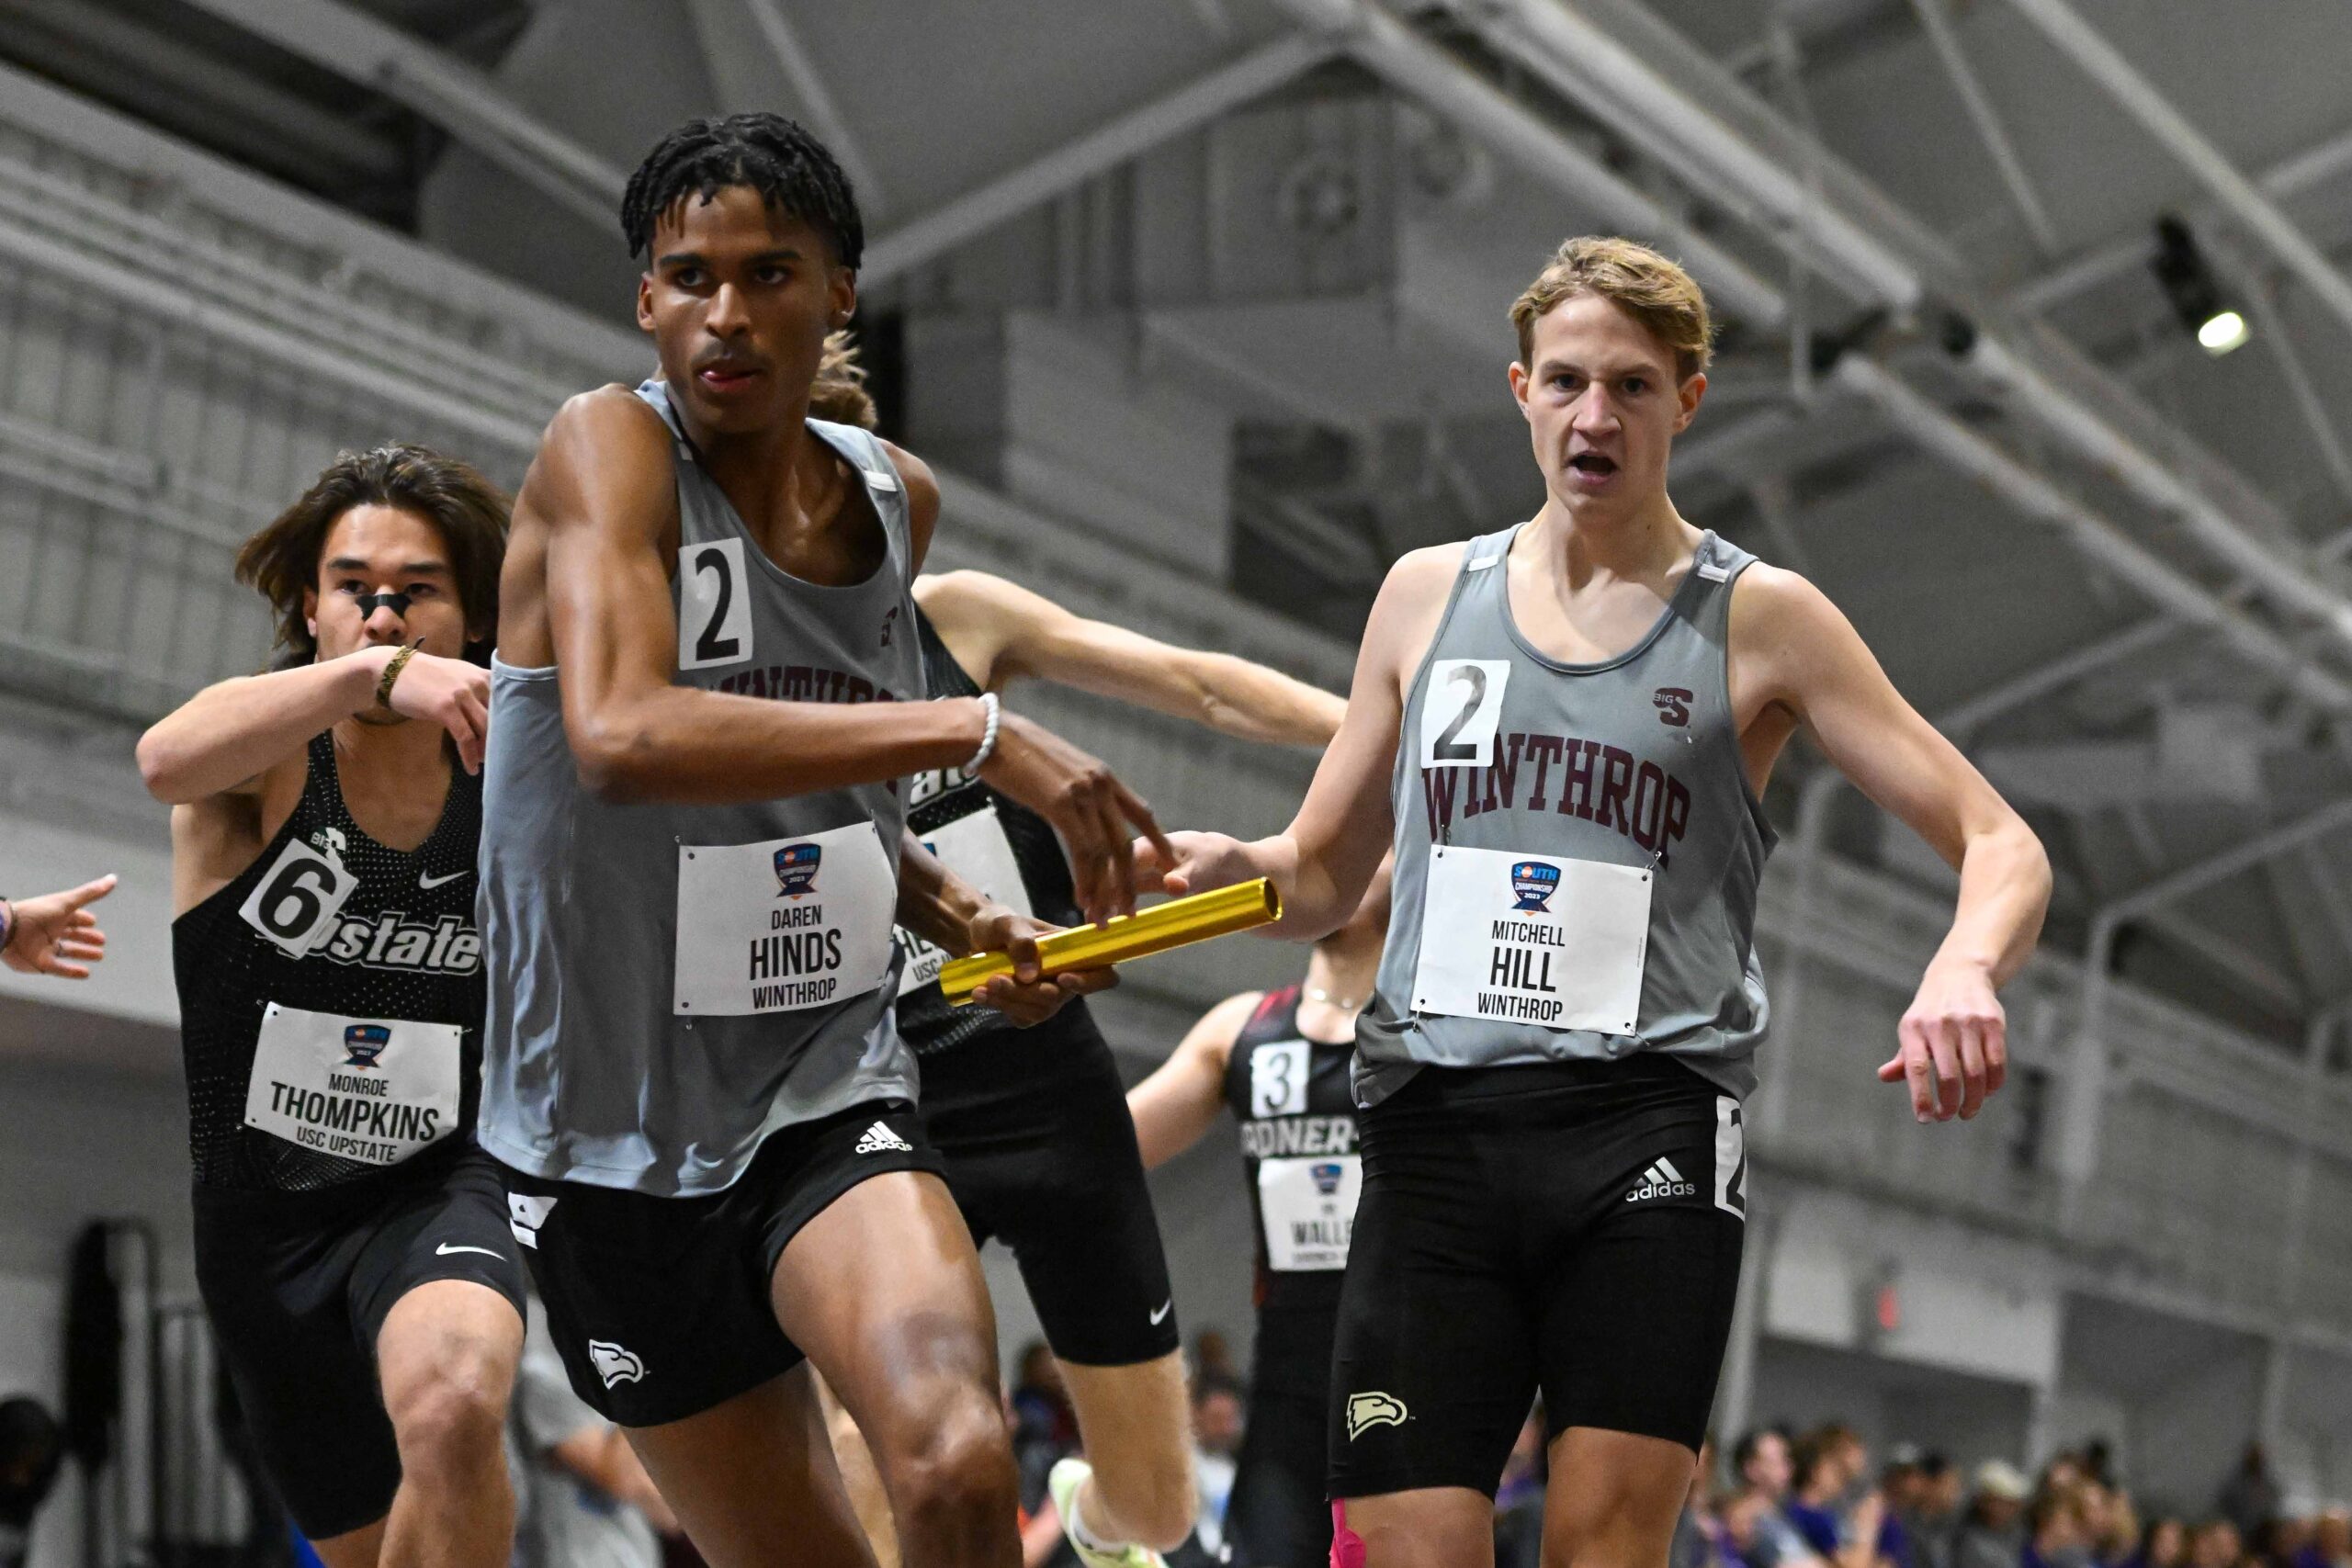 Winthrop performs well at Big South indoor track and field championship